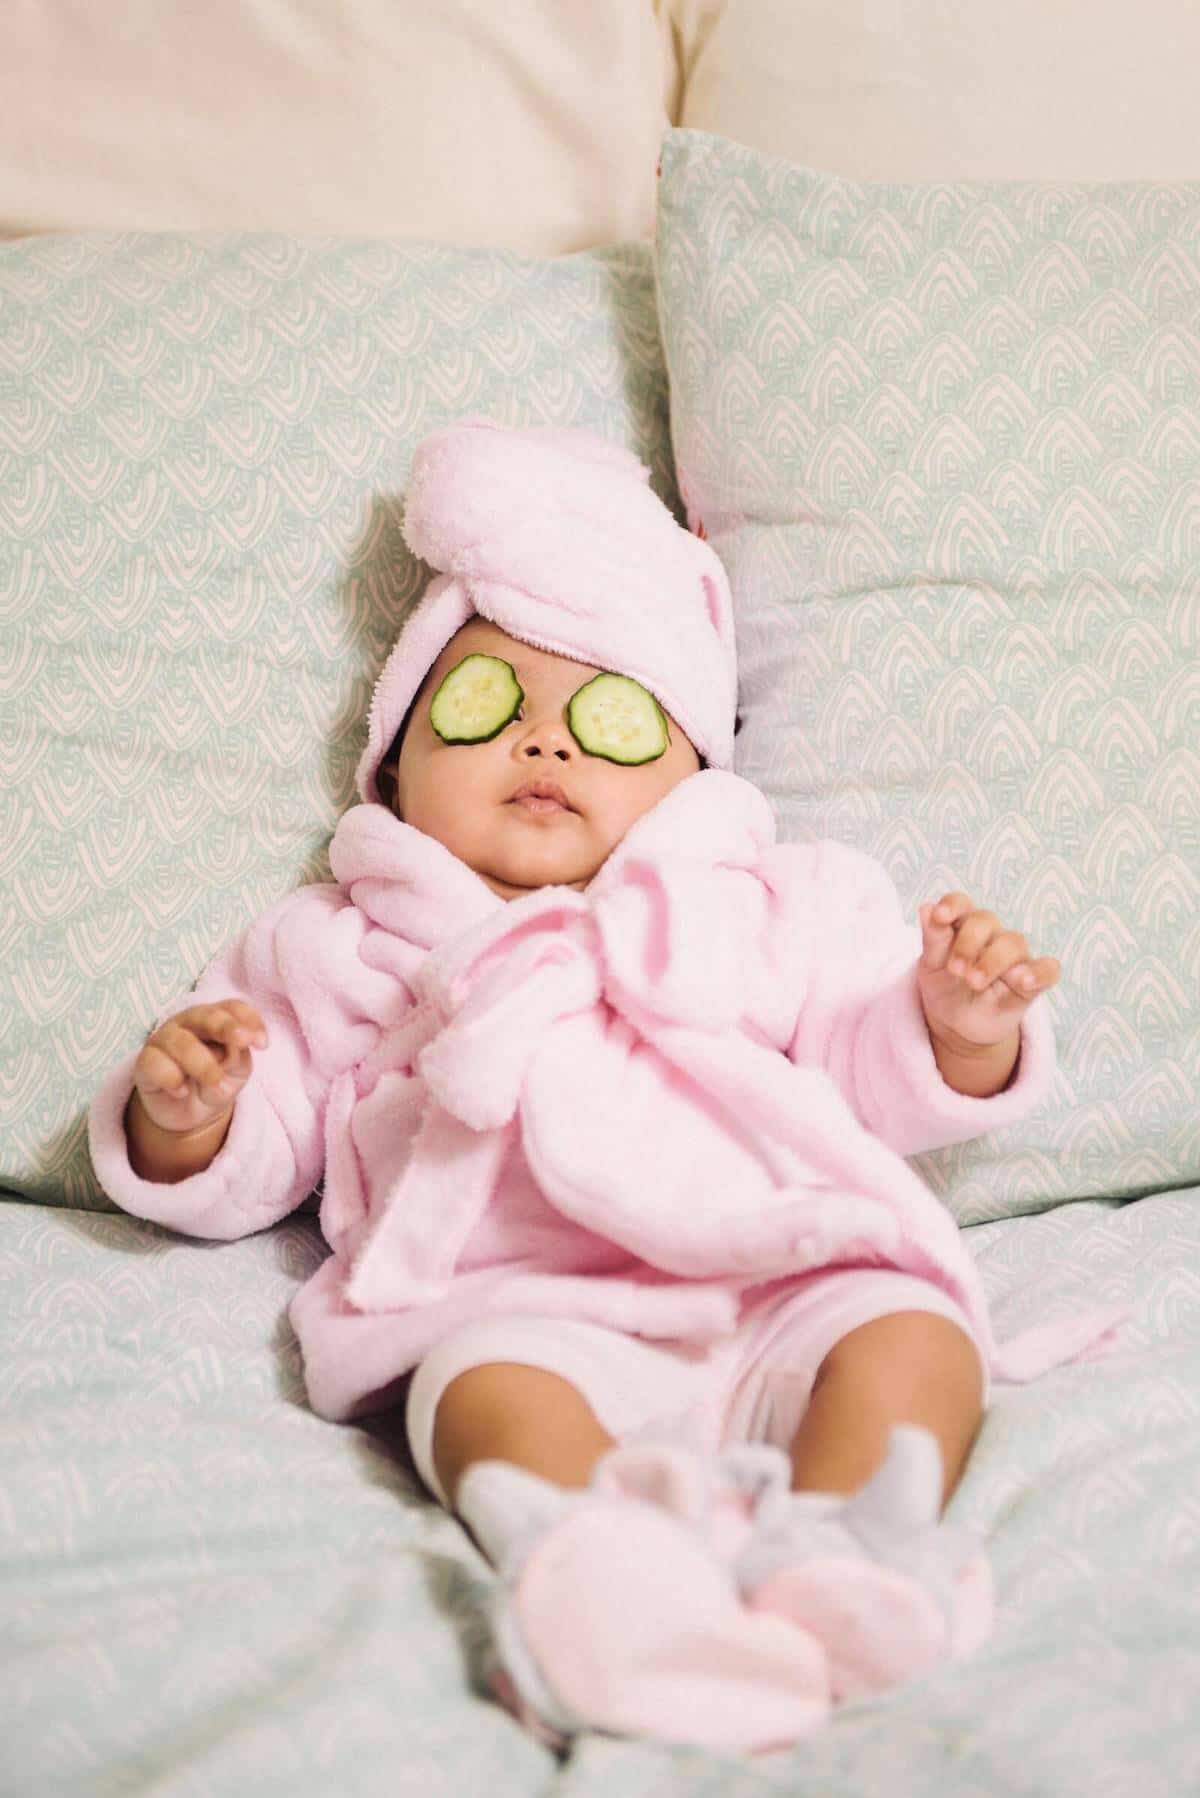 Baby relaxing in a pink bathrobe in bed